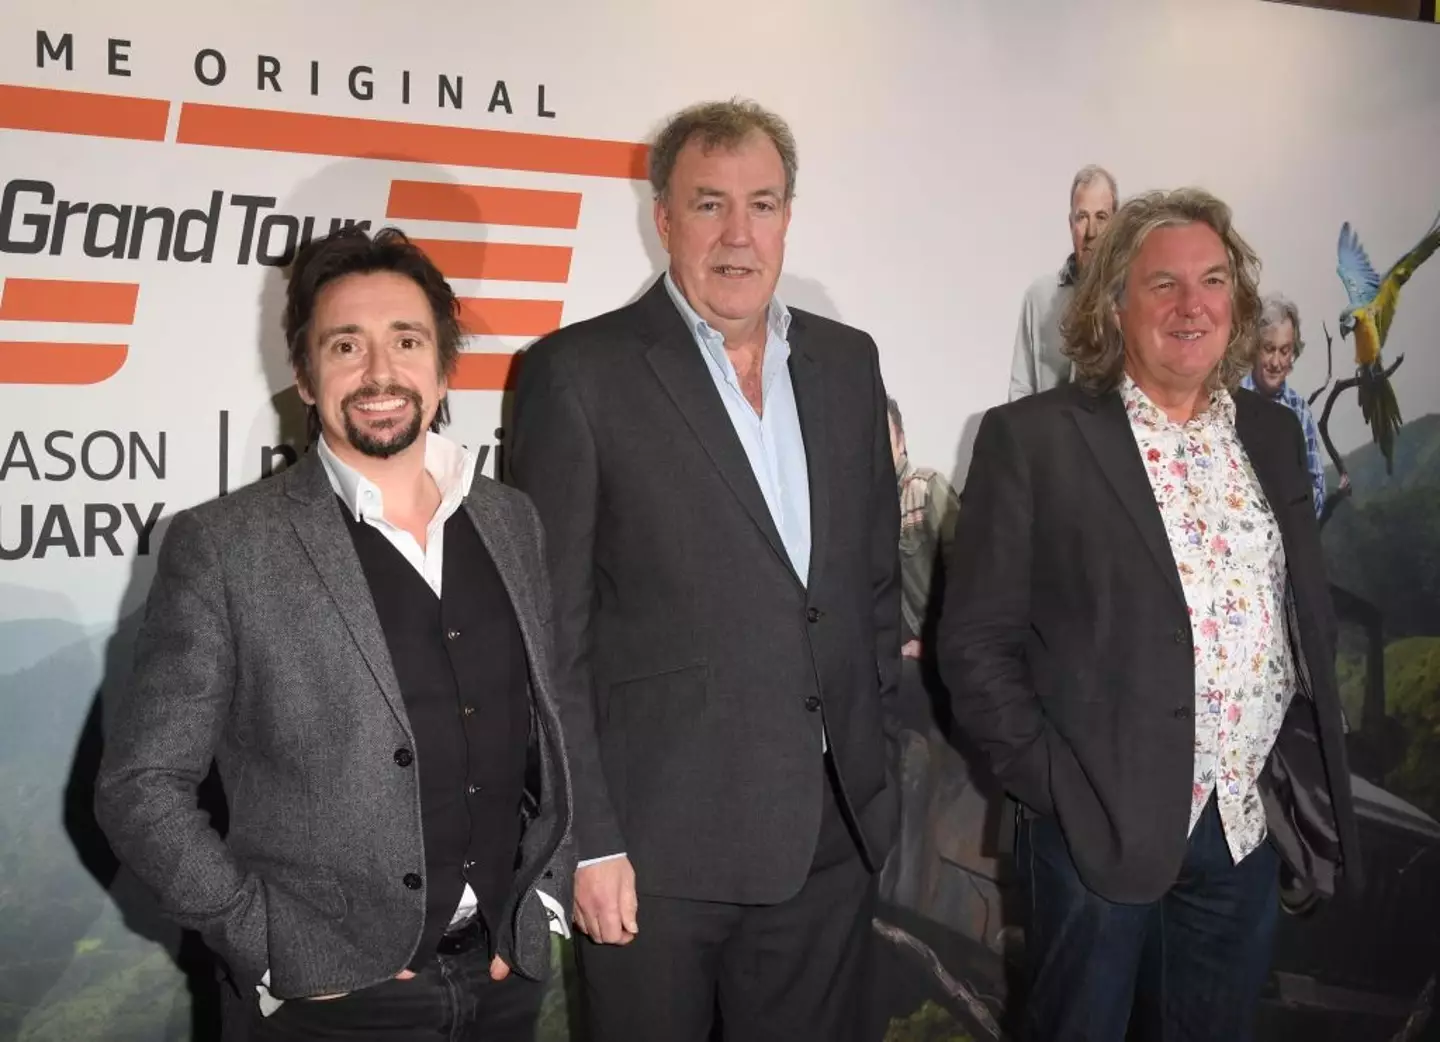 Hammond is best known for being part of this legendary TV trio alongside Jeremy Clarkson and James May.